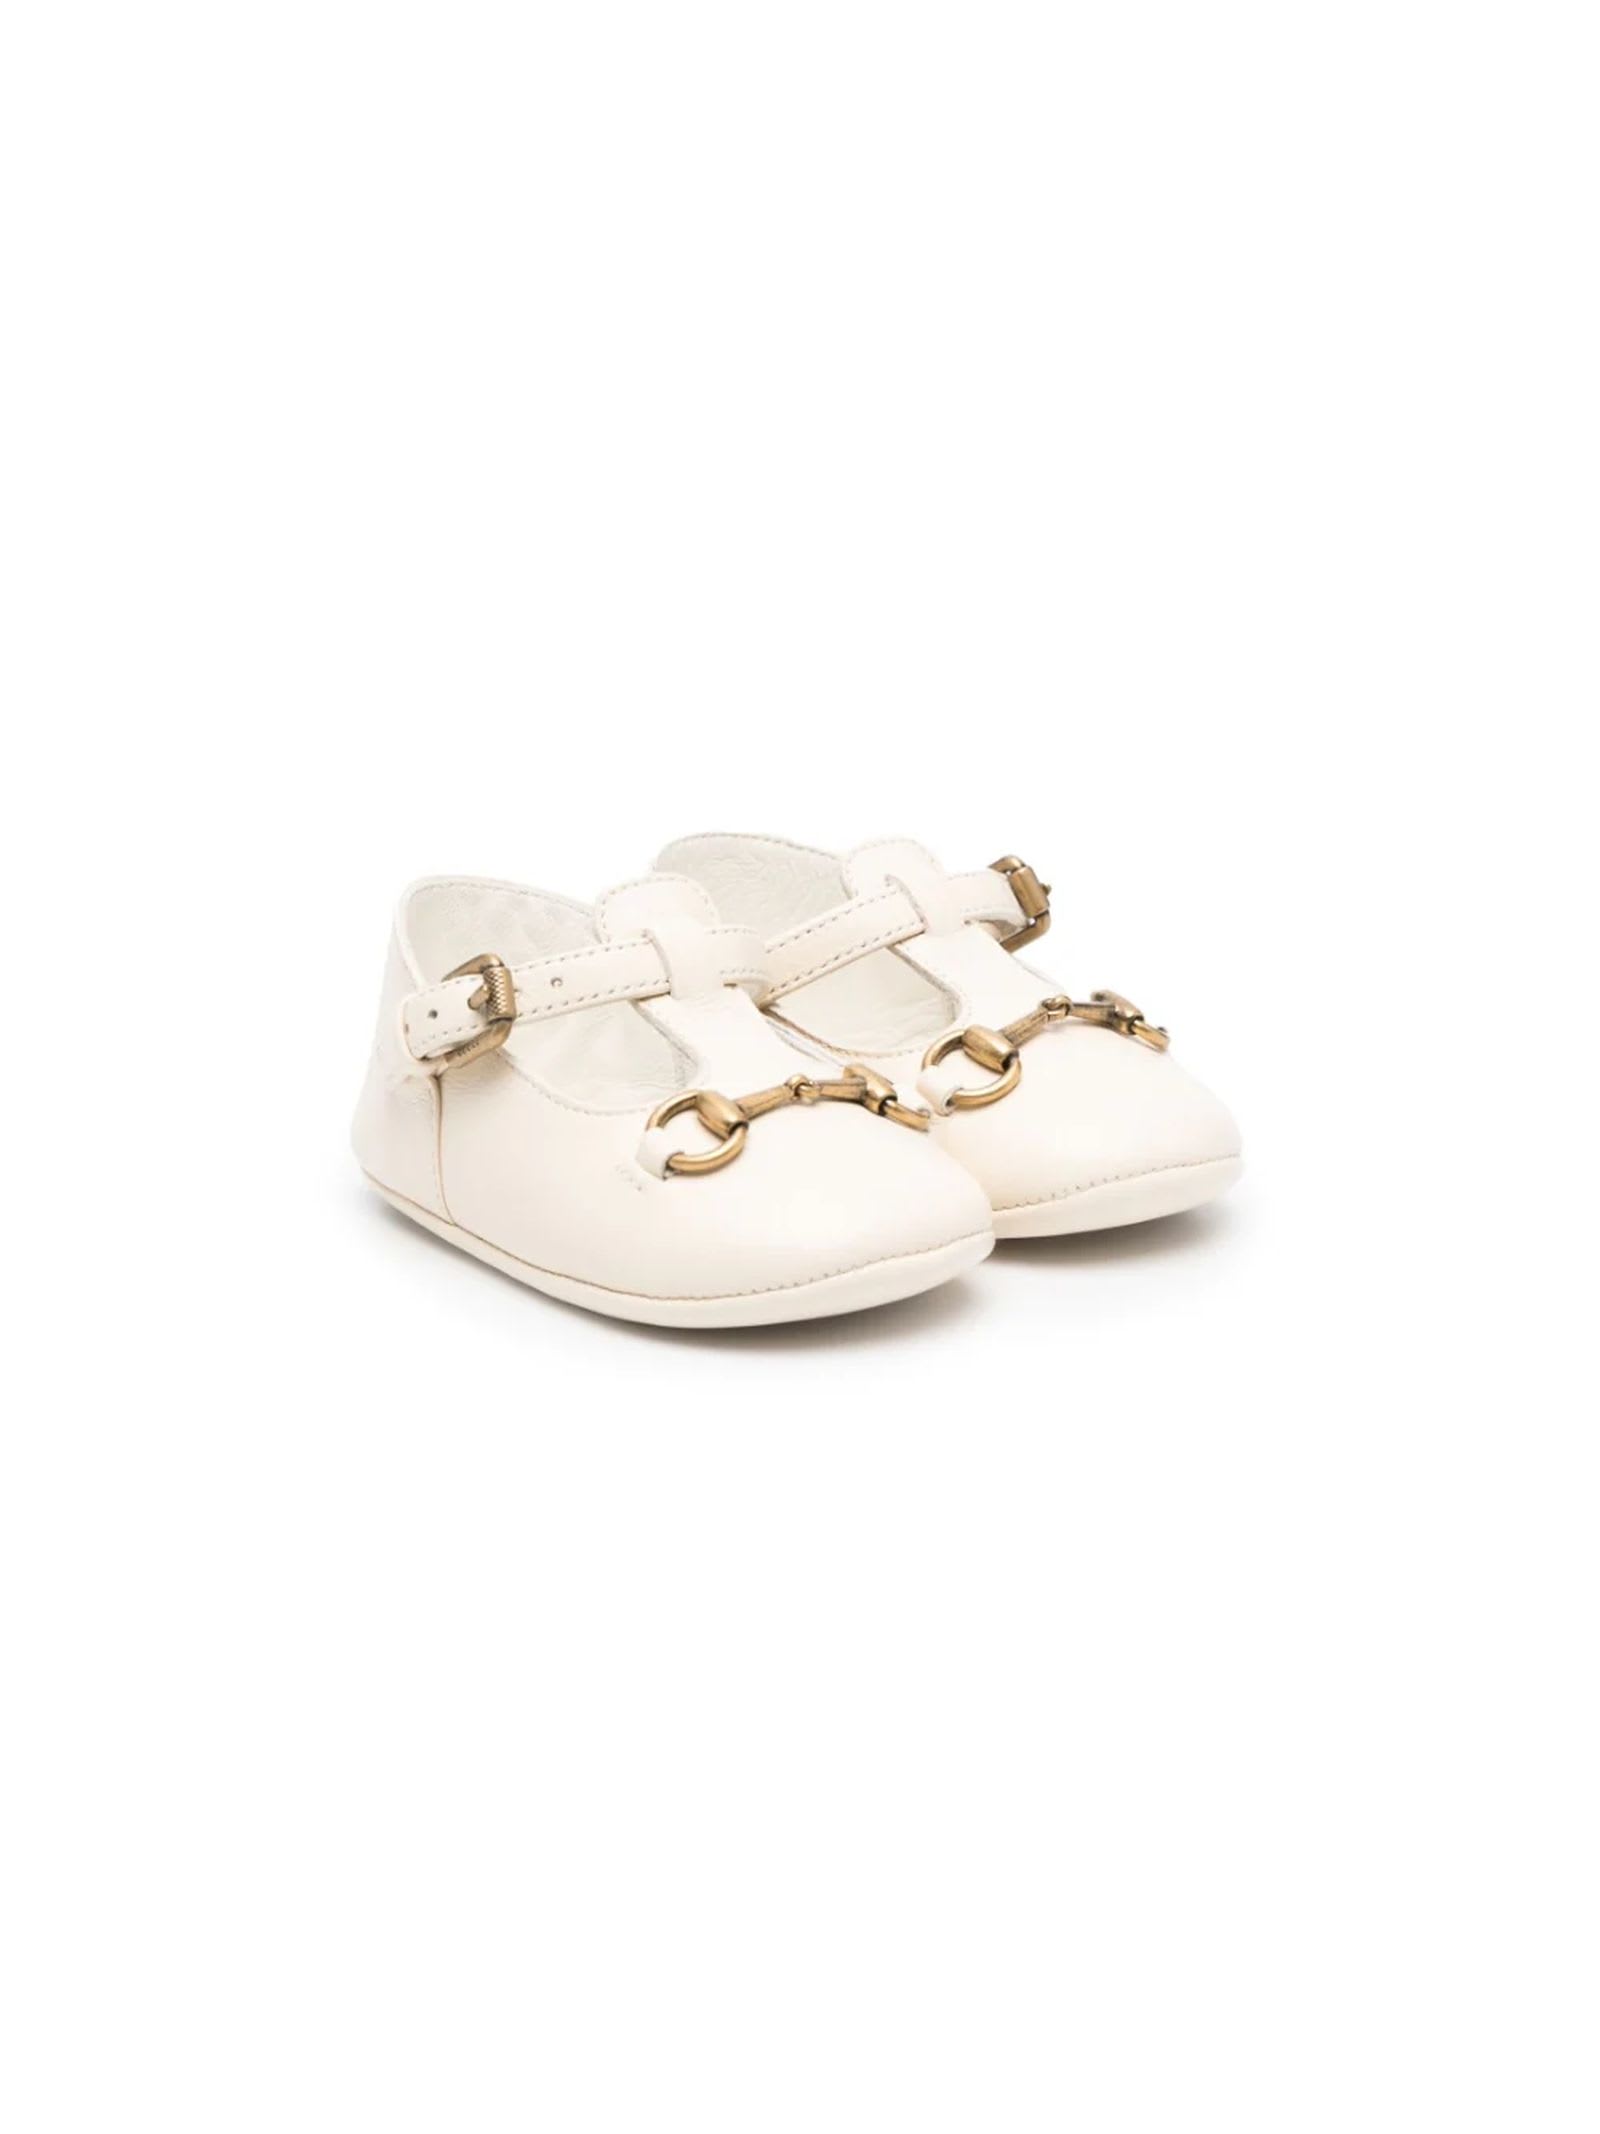 Gucci Kids' White Leather Shoes In Cream